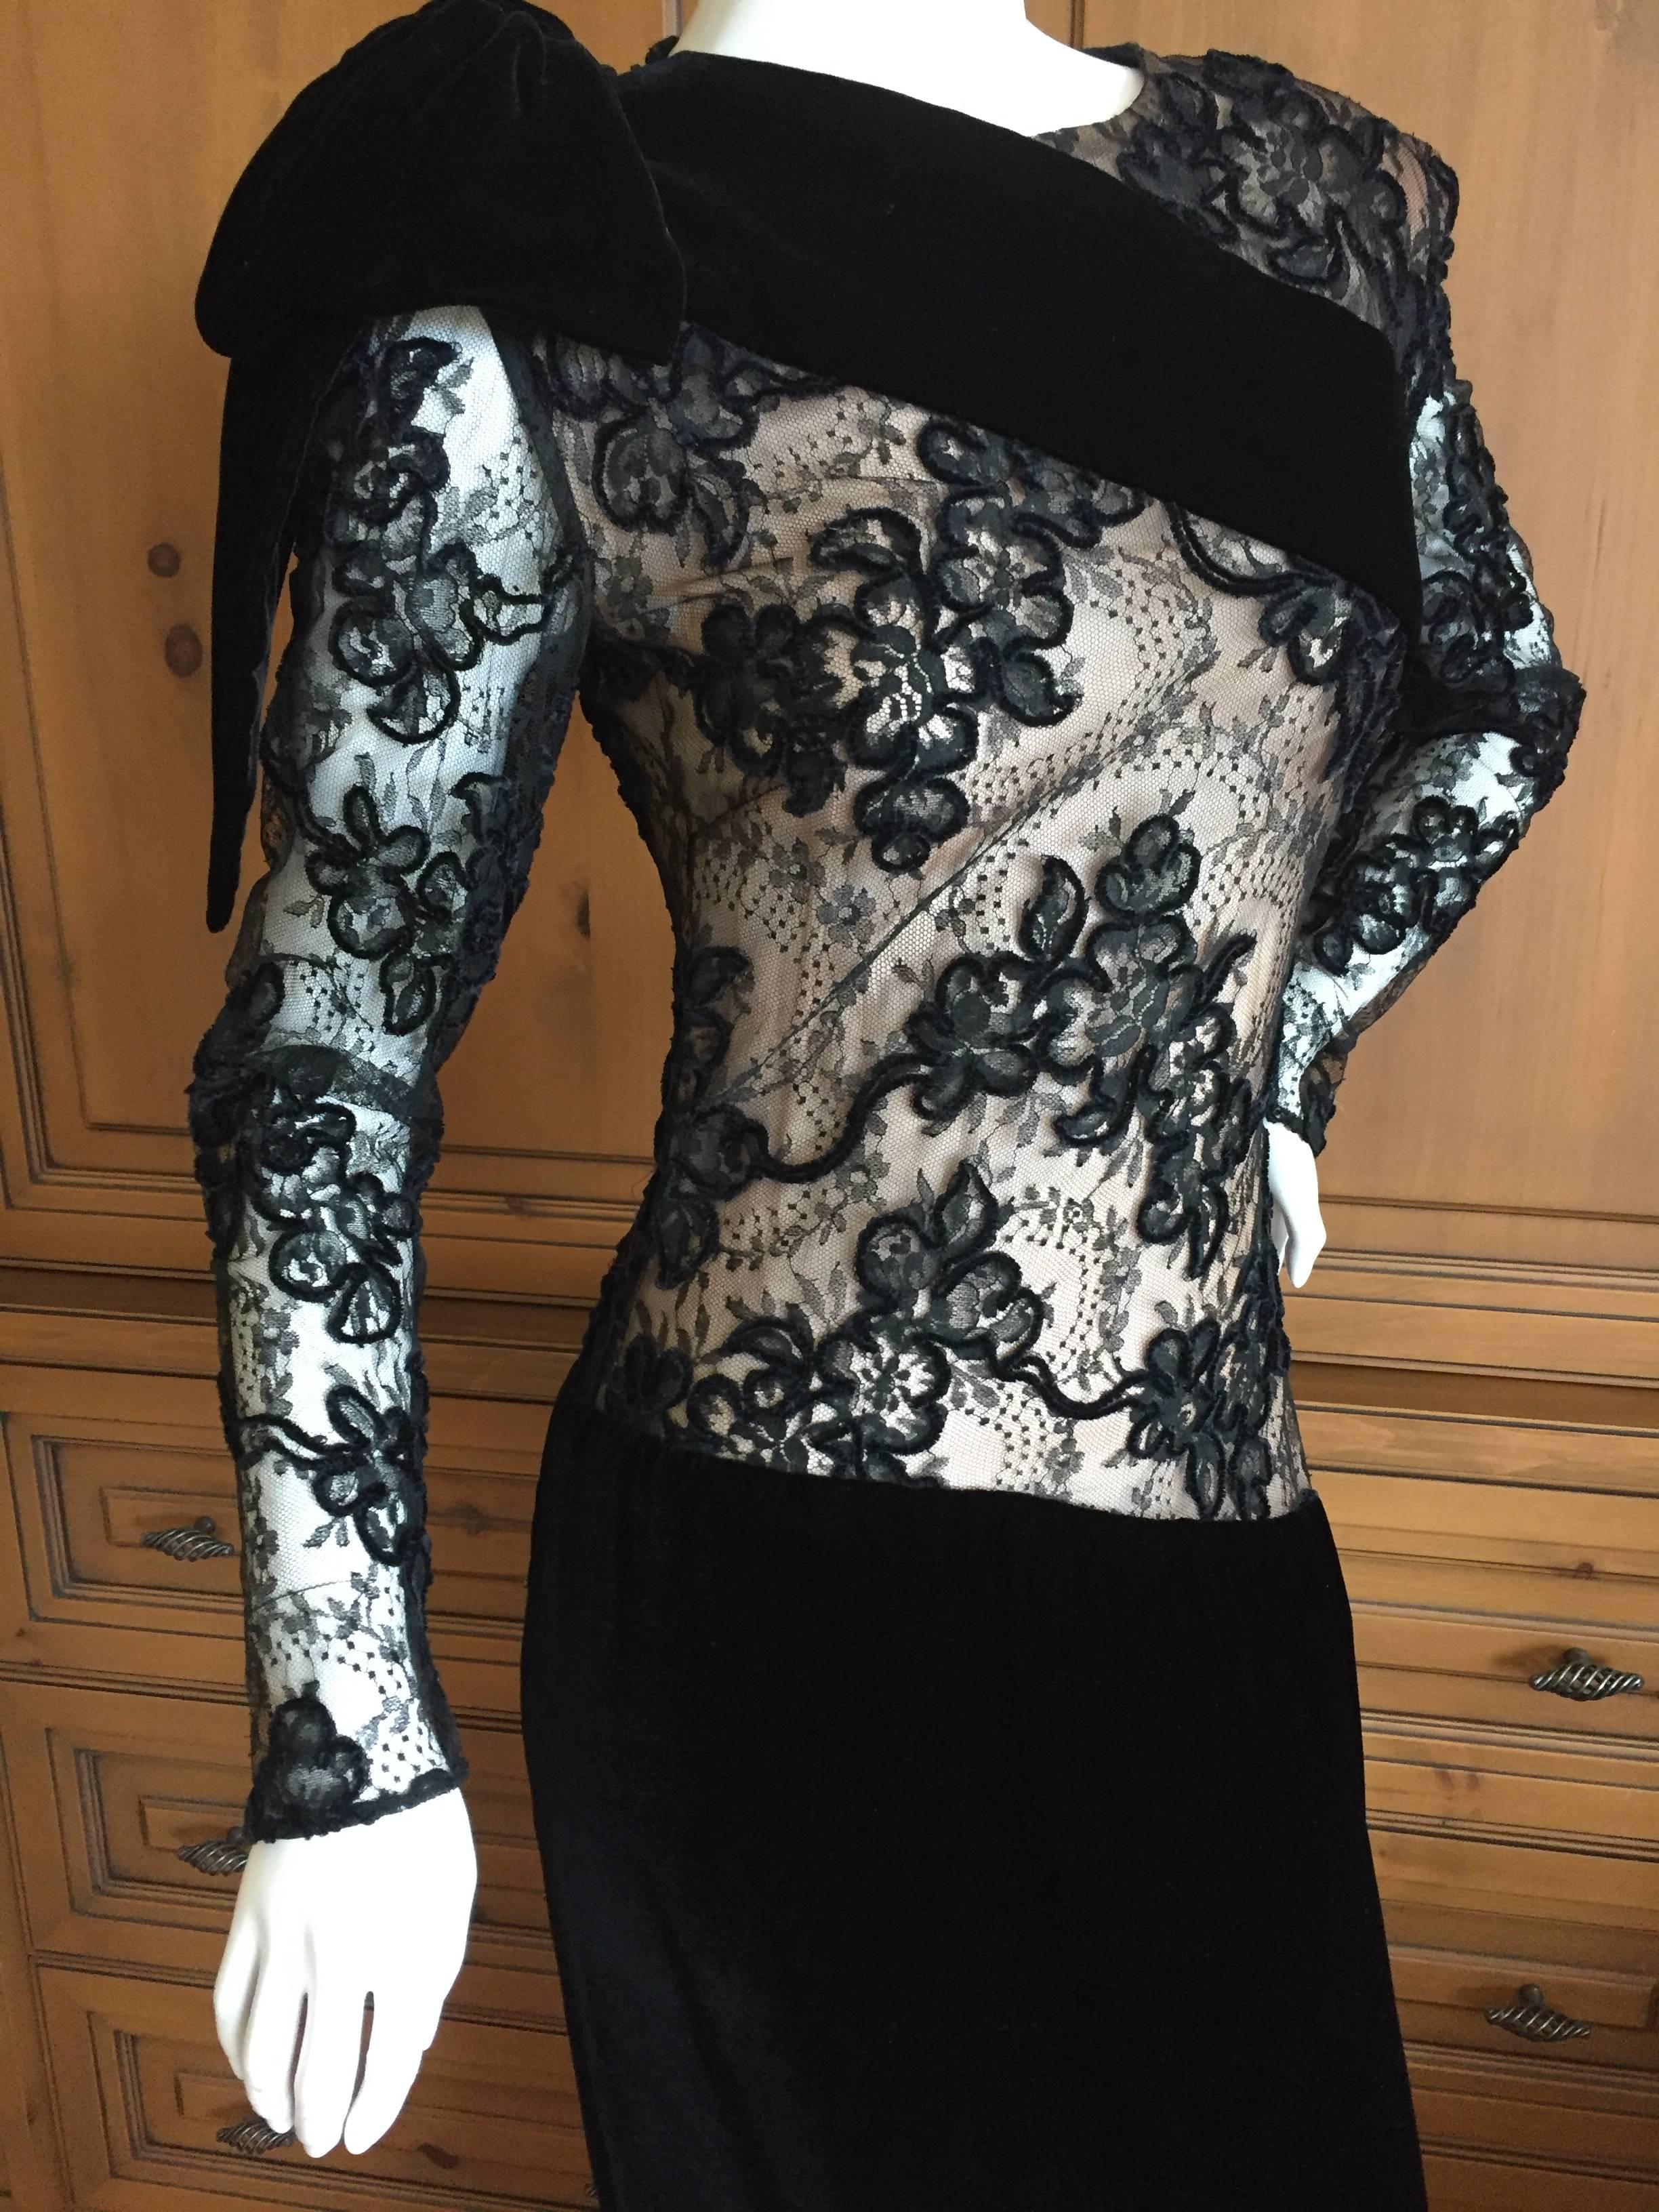 Jacqueline de Ribes Superb Black Lace and Velvet Evening Dress.
This is just so pretty , with the illusion of sheer,  it is lined.
Alternating bands of lace and velvet spiral along this elegant evening dress.

Hand made in France, this is an